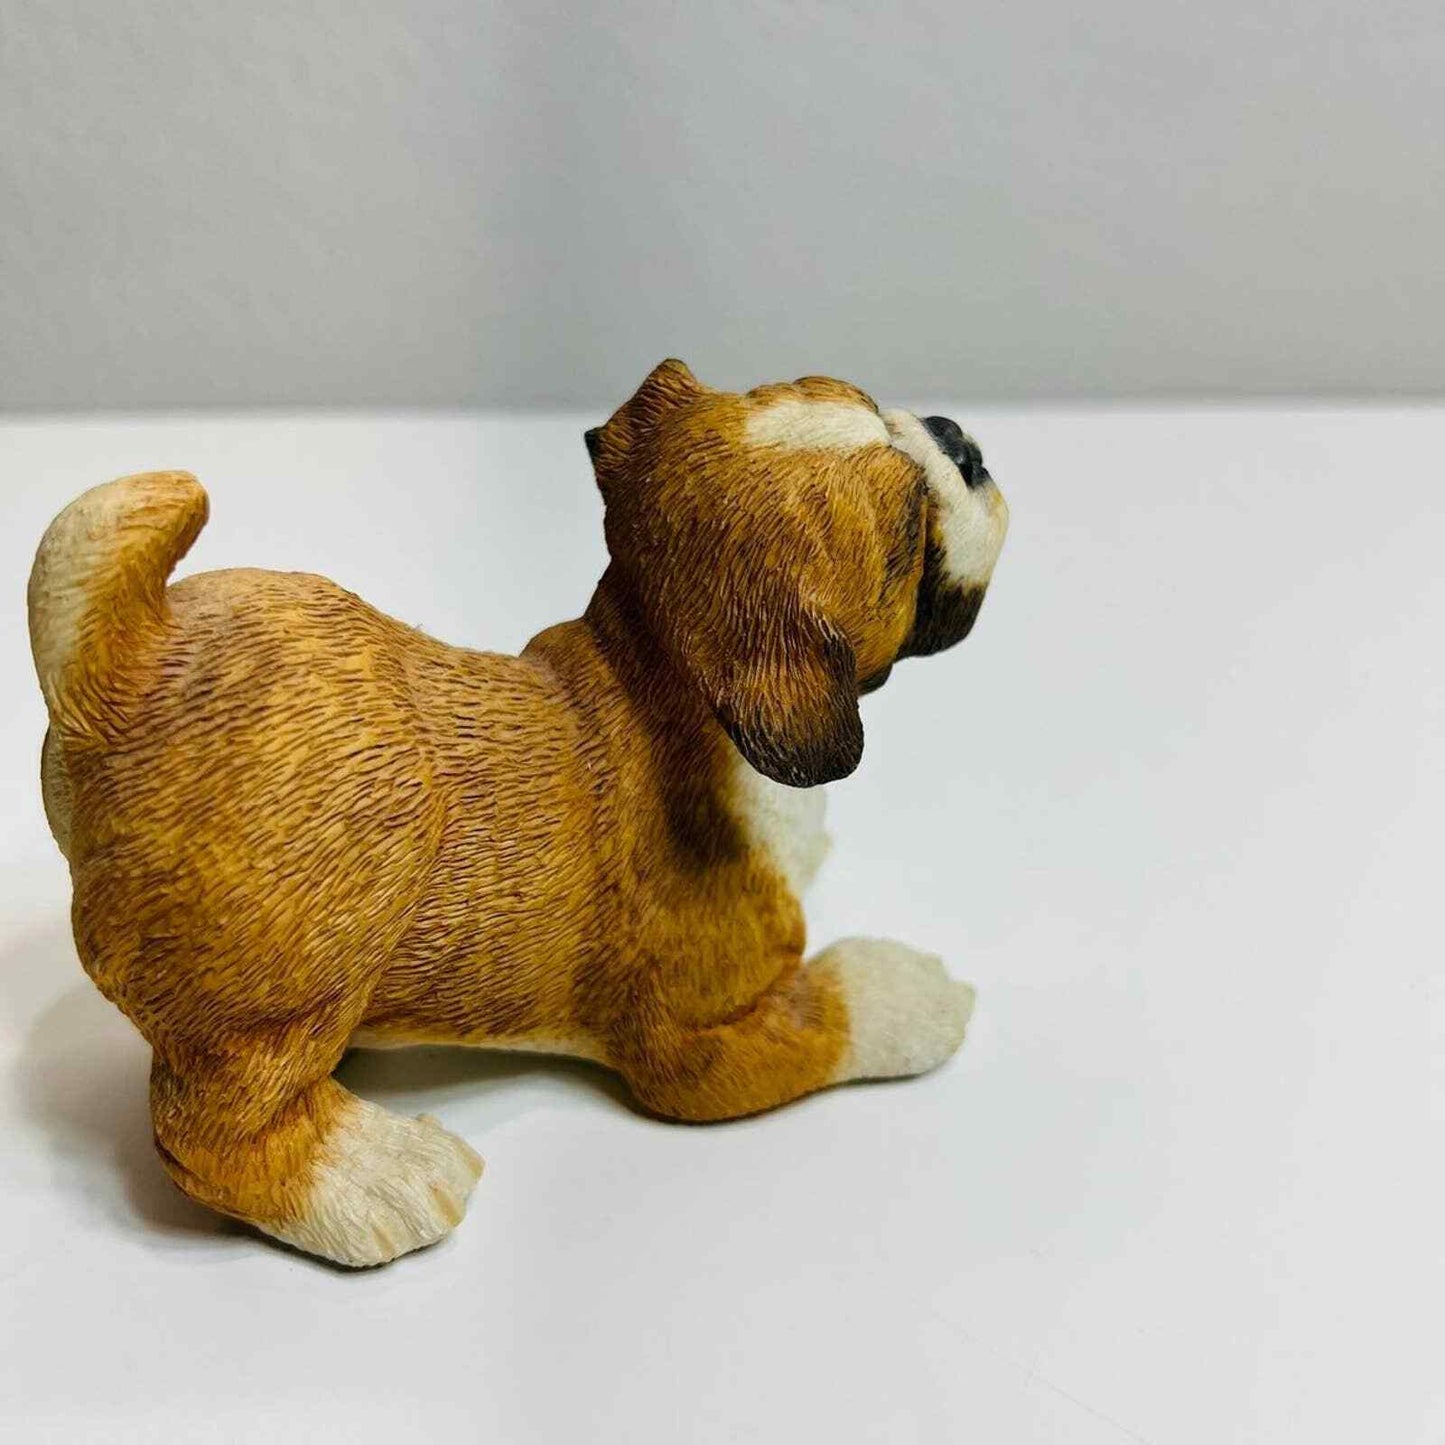 Bulldog Pup Dog Figurine Country Artists Hand Painted Home Decor